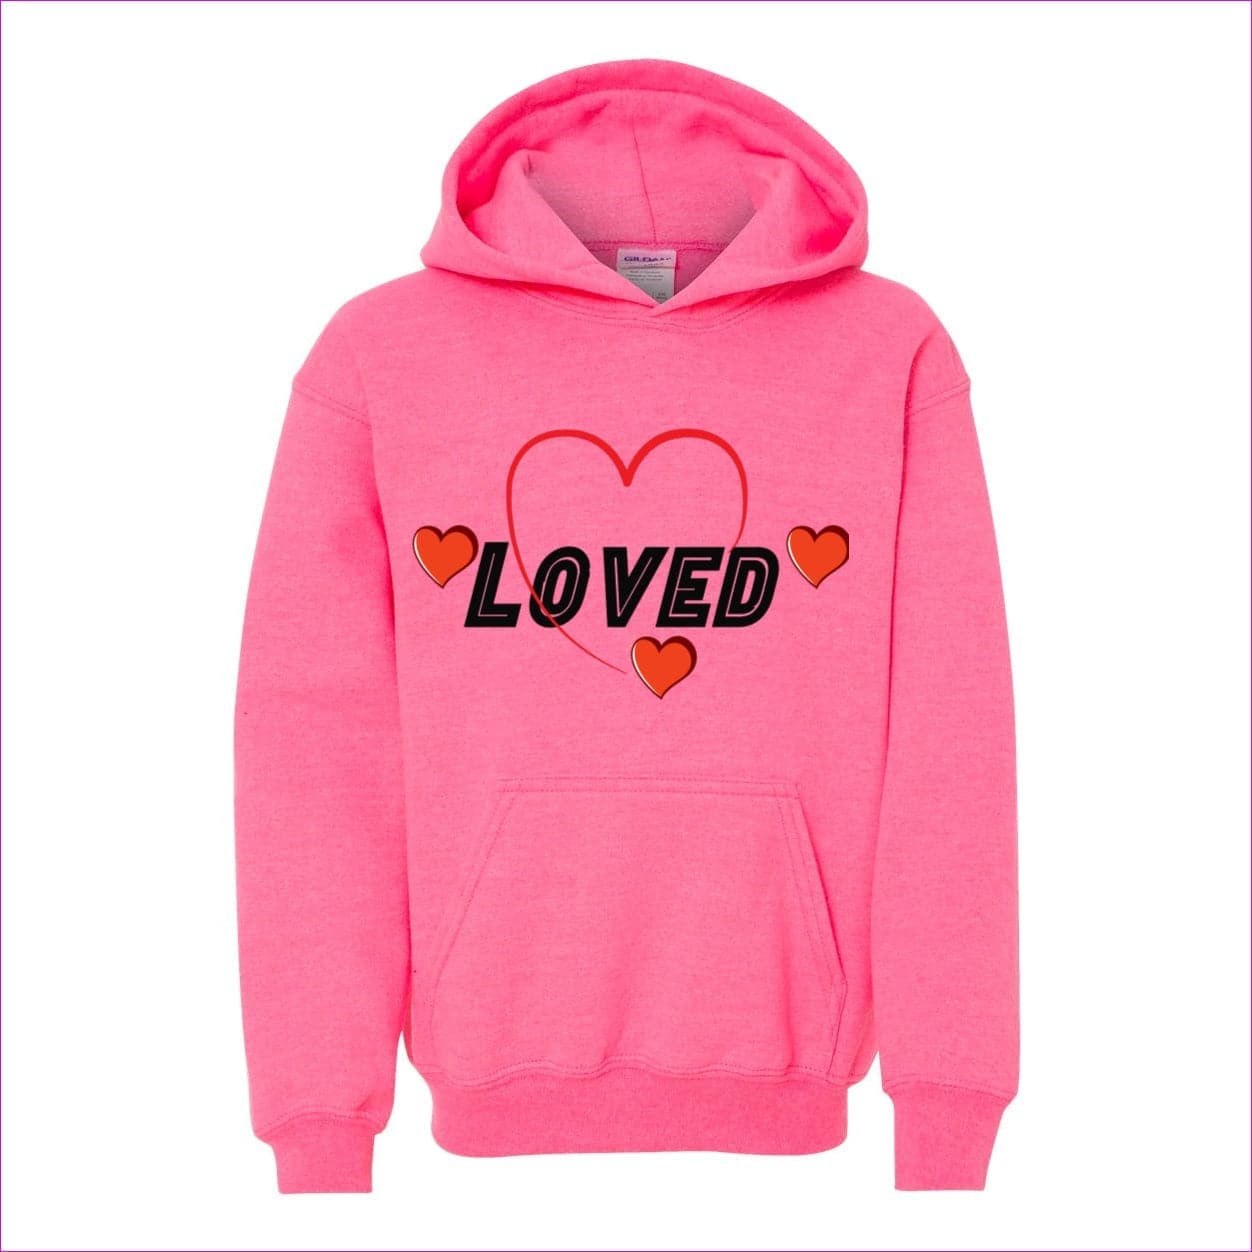 Safety Pink - Loved Heavy Blend Youth Hooded Sweatshirt - kids hoodie at TFC&H Co.